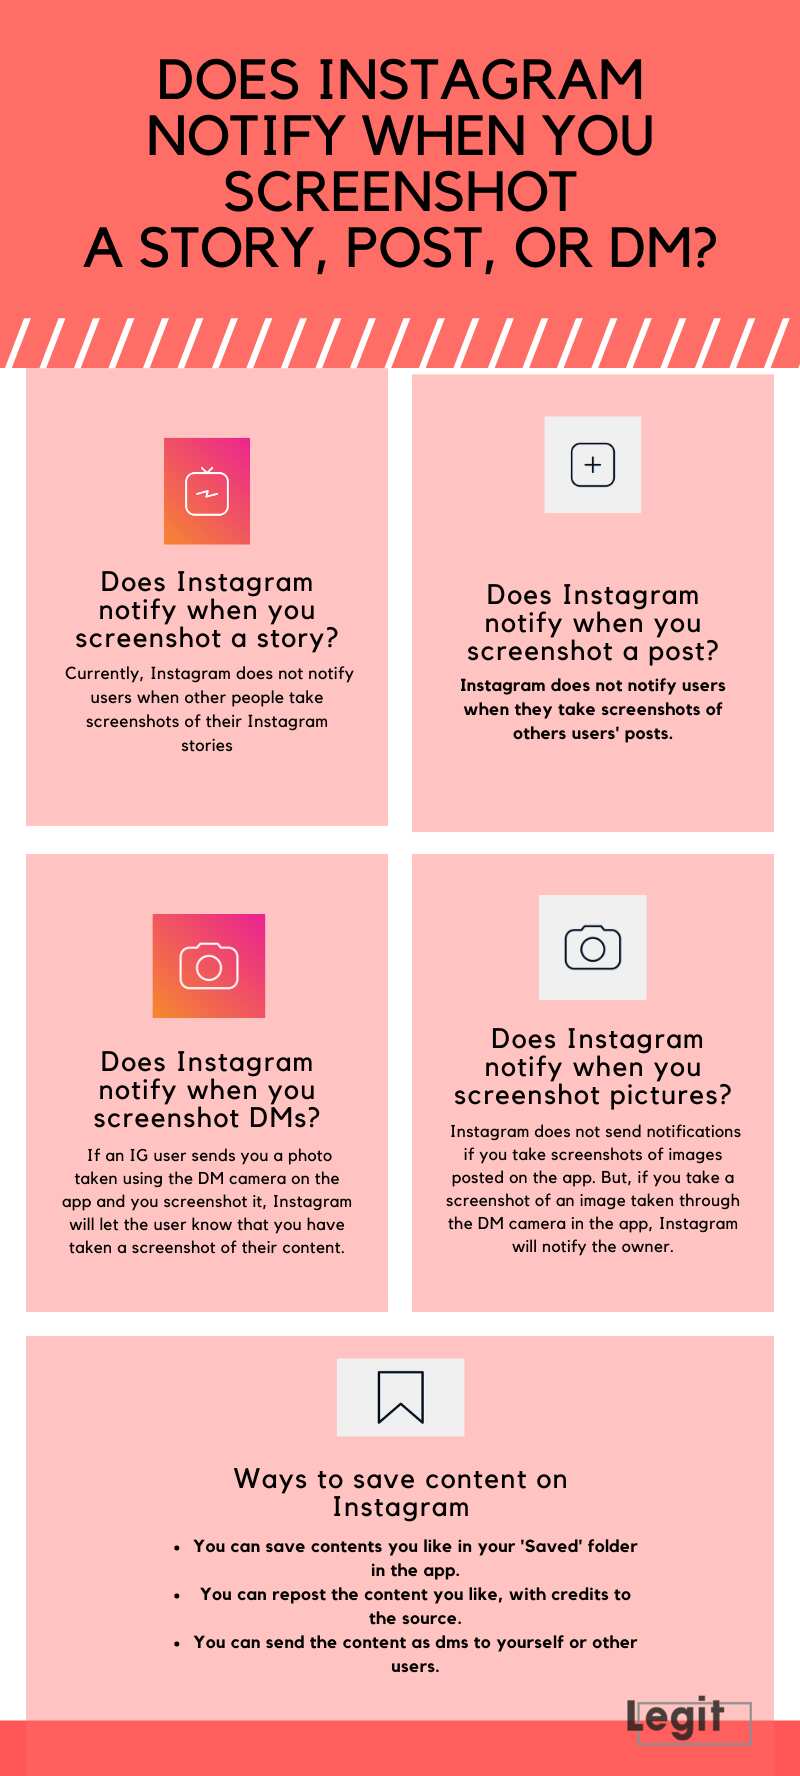 Does Instagram notify when you screenshot a story?